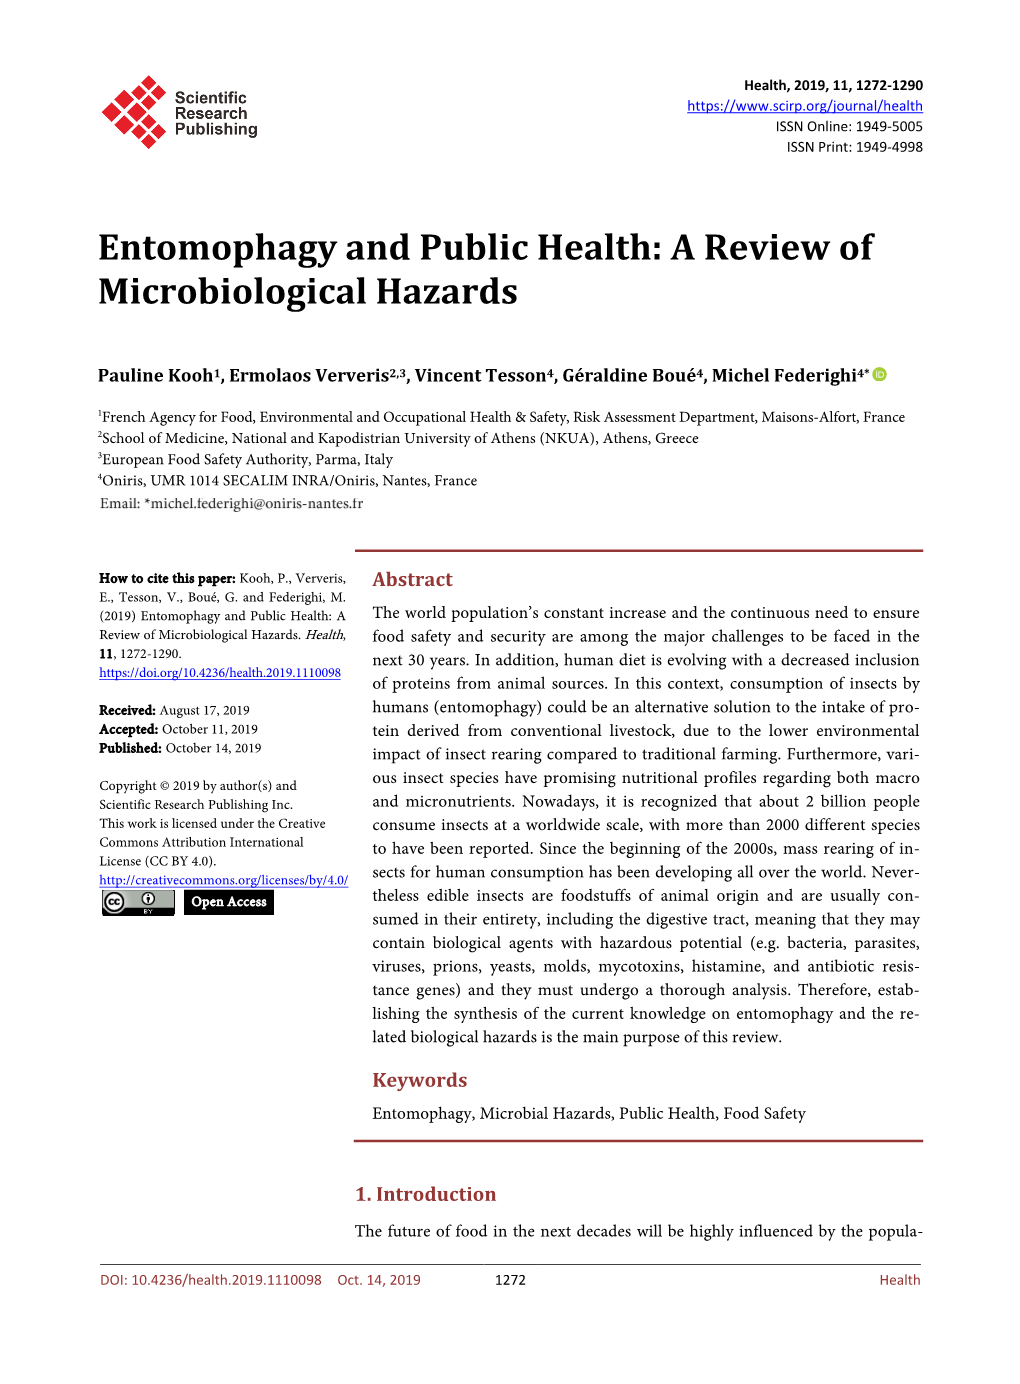 Entomophagy and Public Health: a Review of Microbiological Hazards